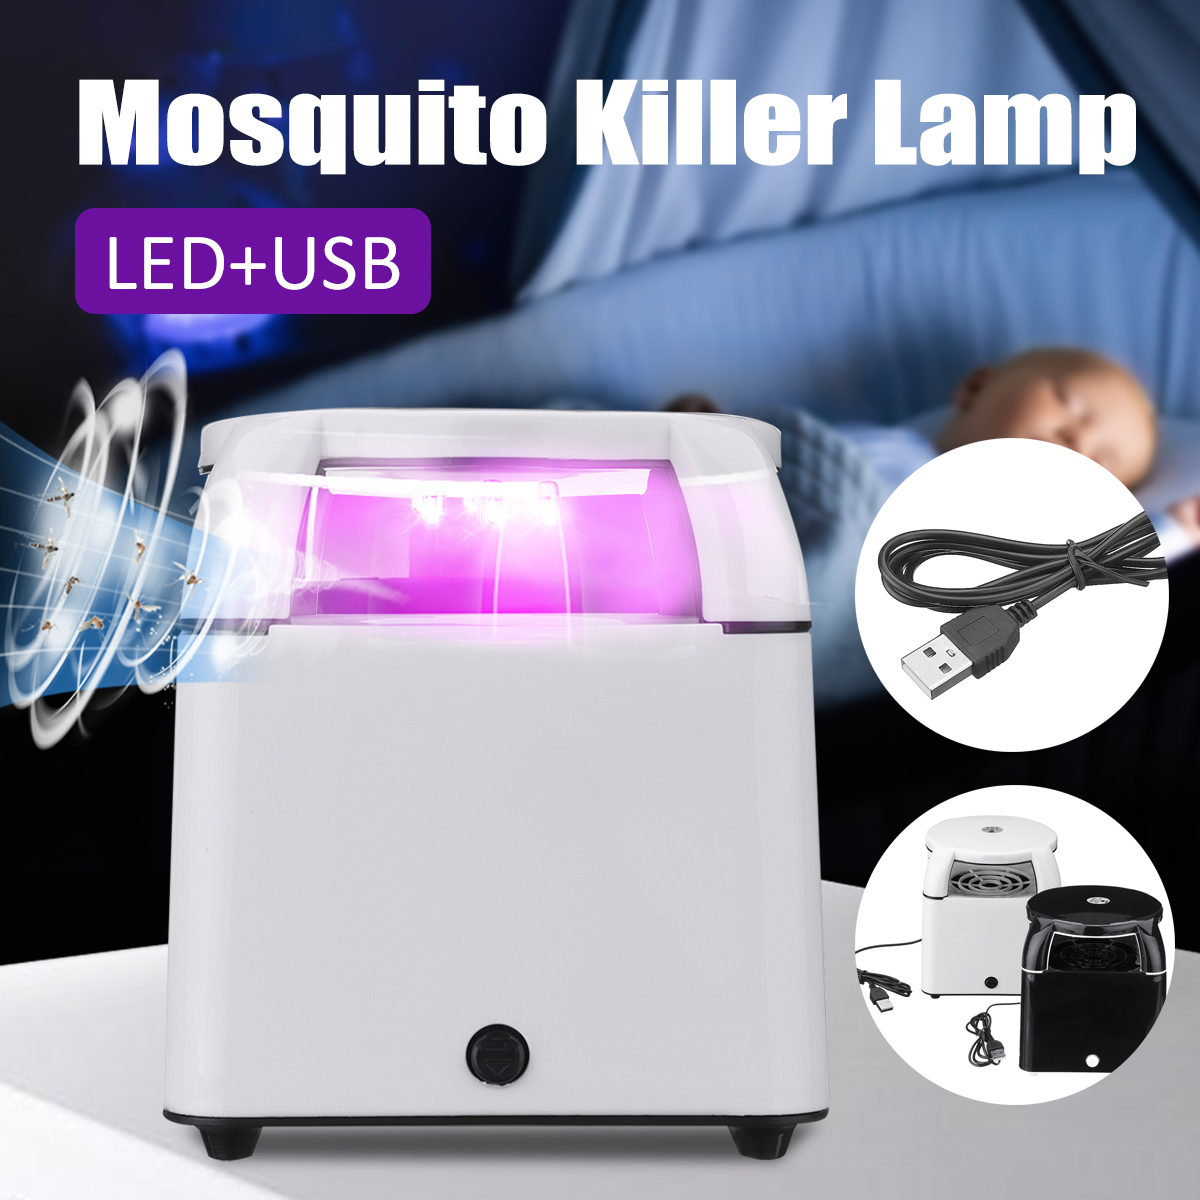 5W-LED-Mosquito-Killer-Lamp-No-Radiation-USB-Household-Mosquito-Killing-Light-Repellent-Low-Noise-1421786-3